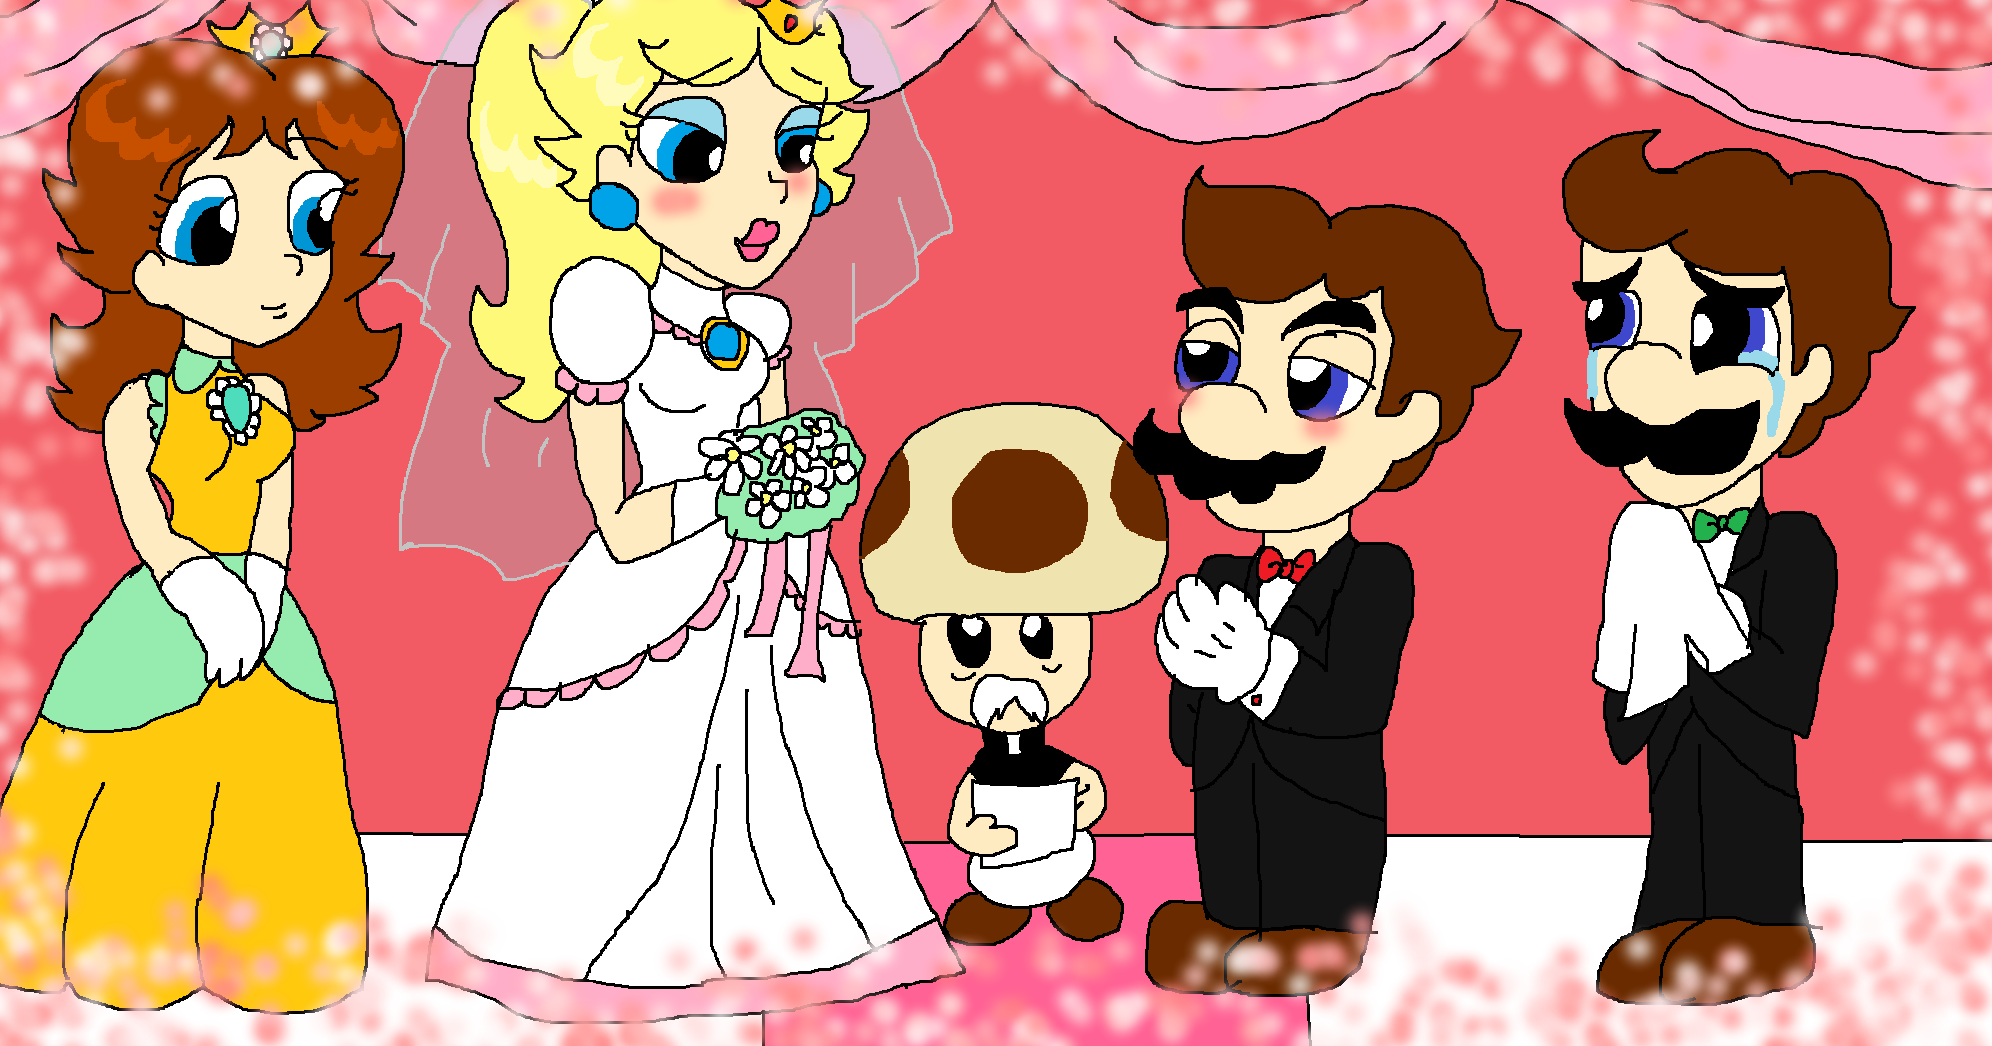 pix Getting Married Mario And Peach Wedding Kiss mario and peach s wedding ...